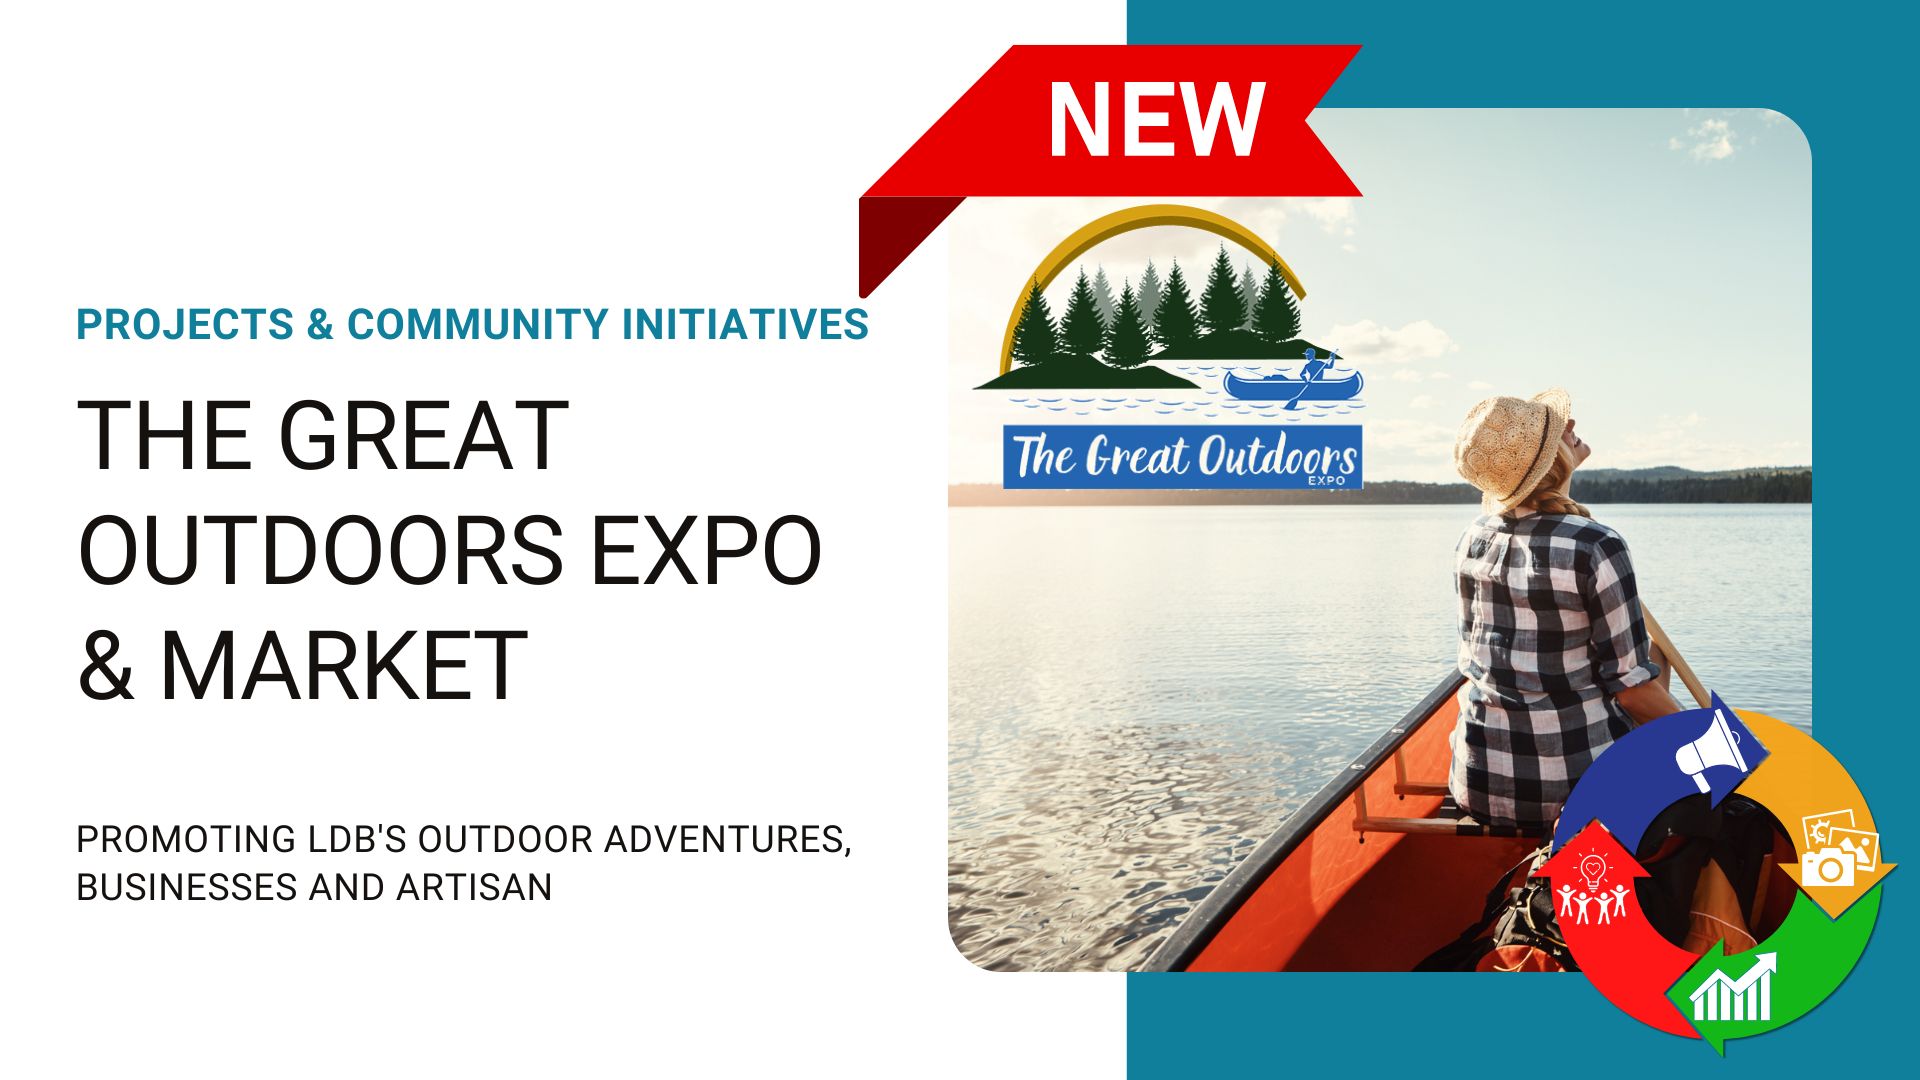 Title slide image showing a picture of a woman in a canoe as part of the advertising for the Great Outdoors Expo and Market.